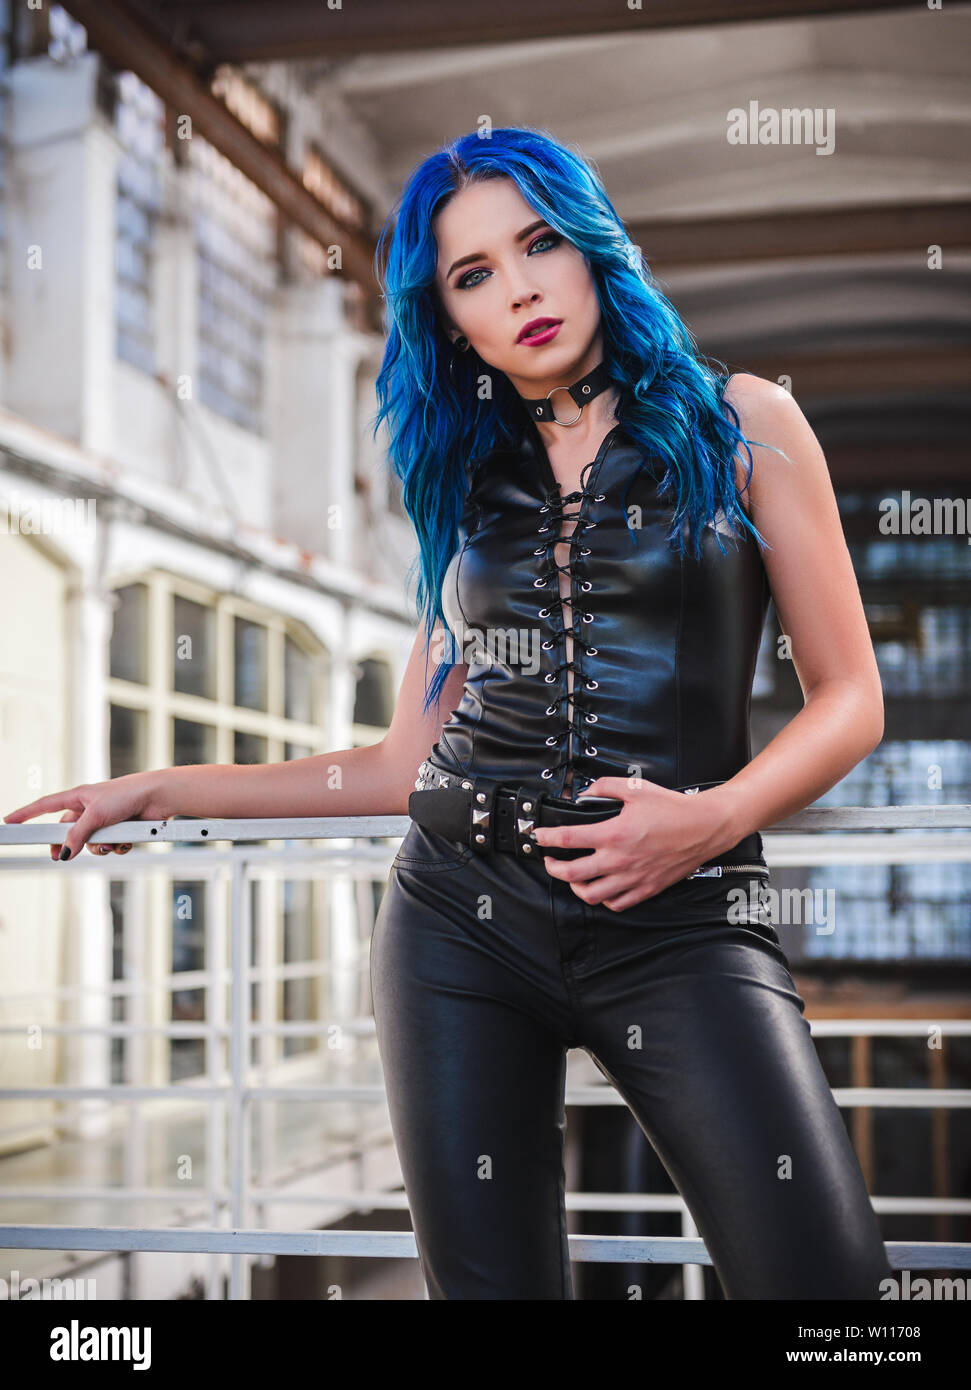 Cool Rock Girl Informal Model With Blue Hair Dressed In The Black Leather Pants And Vest Stock Photo Alamy